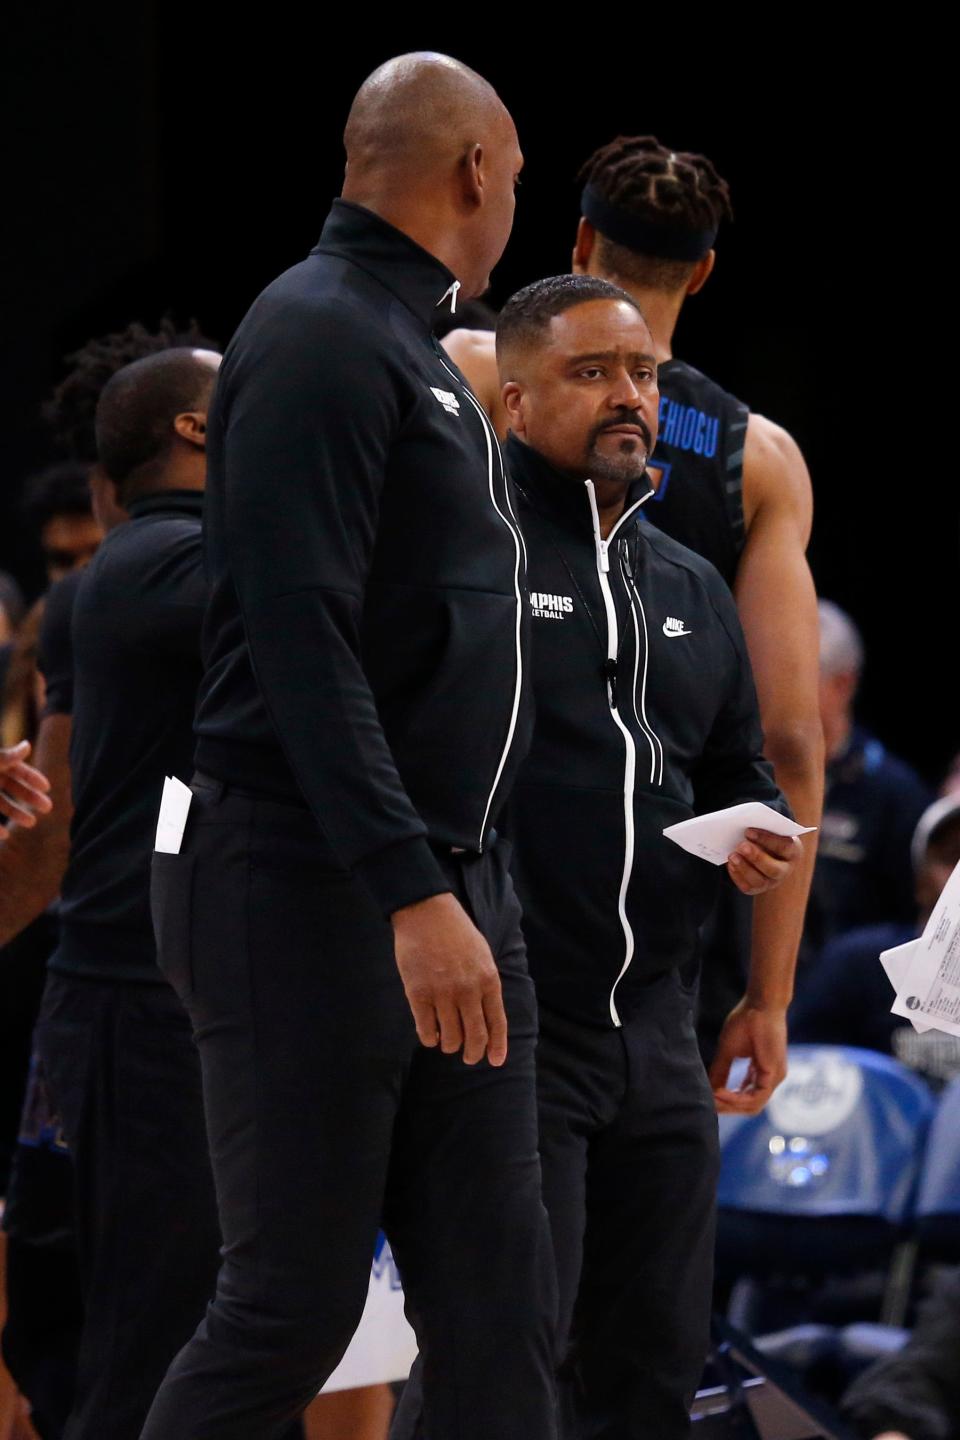 Frank Haith, right, talks with Memphis head coach Penny Hardaway during a game last season. Haith served as an assistant at Memphis a year ago but has officially joined the Texas men's basketball staff.